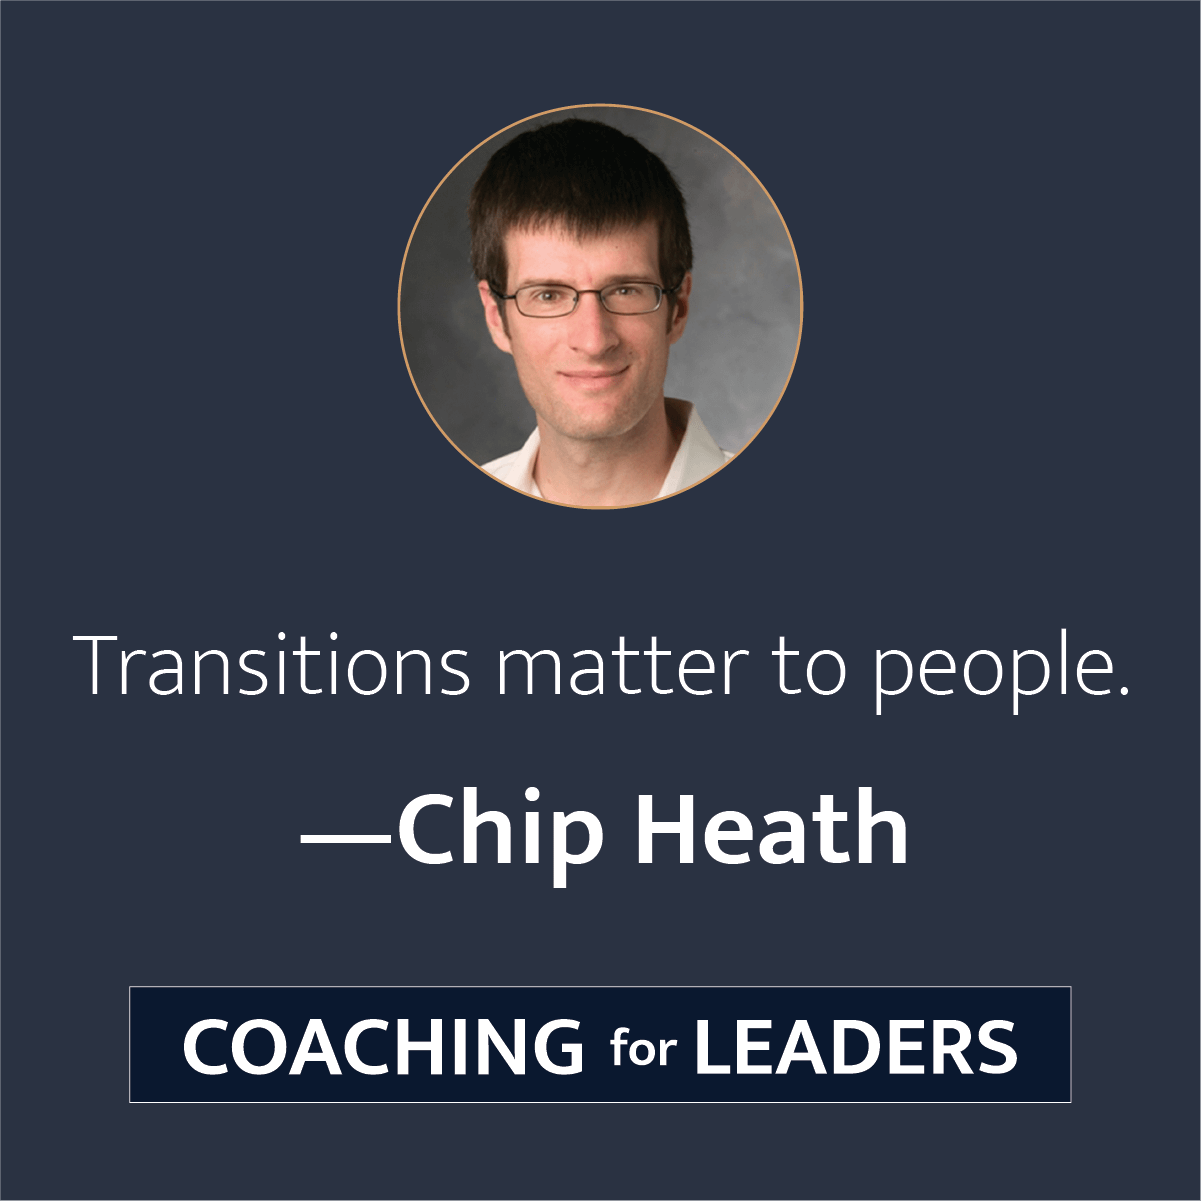 Transitions matter to people.